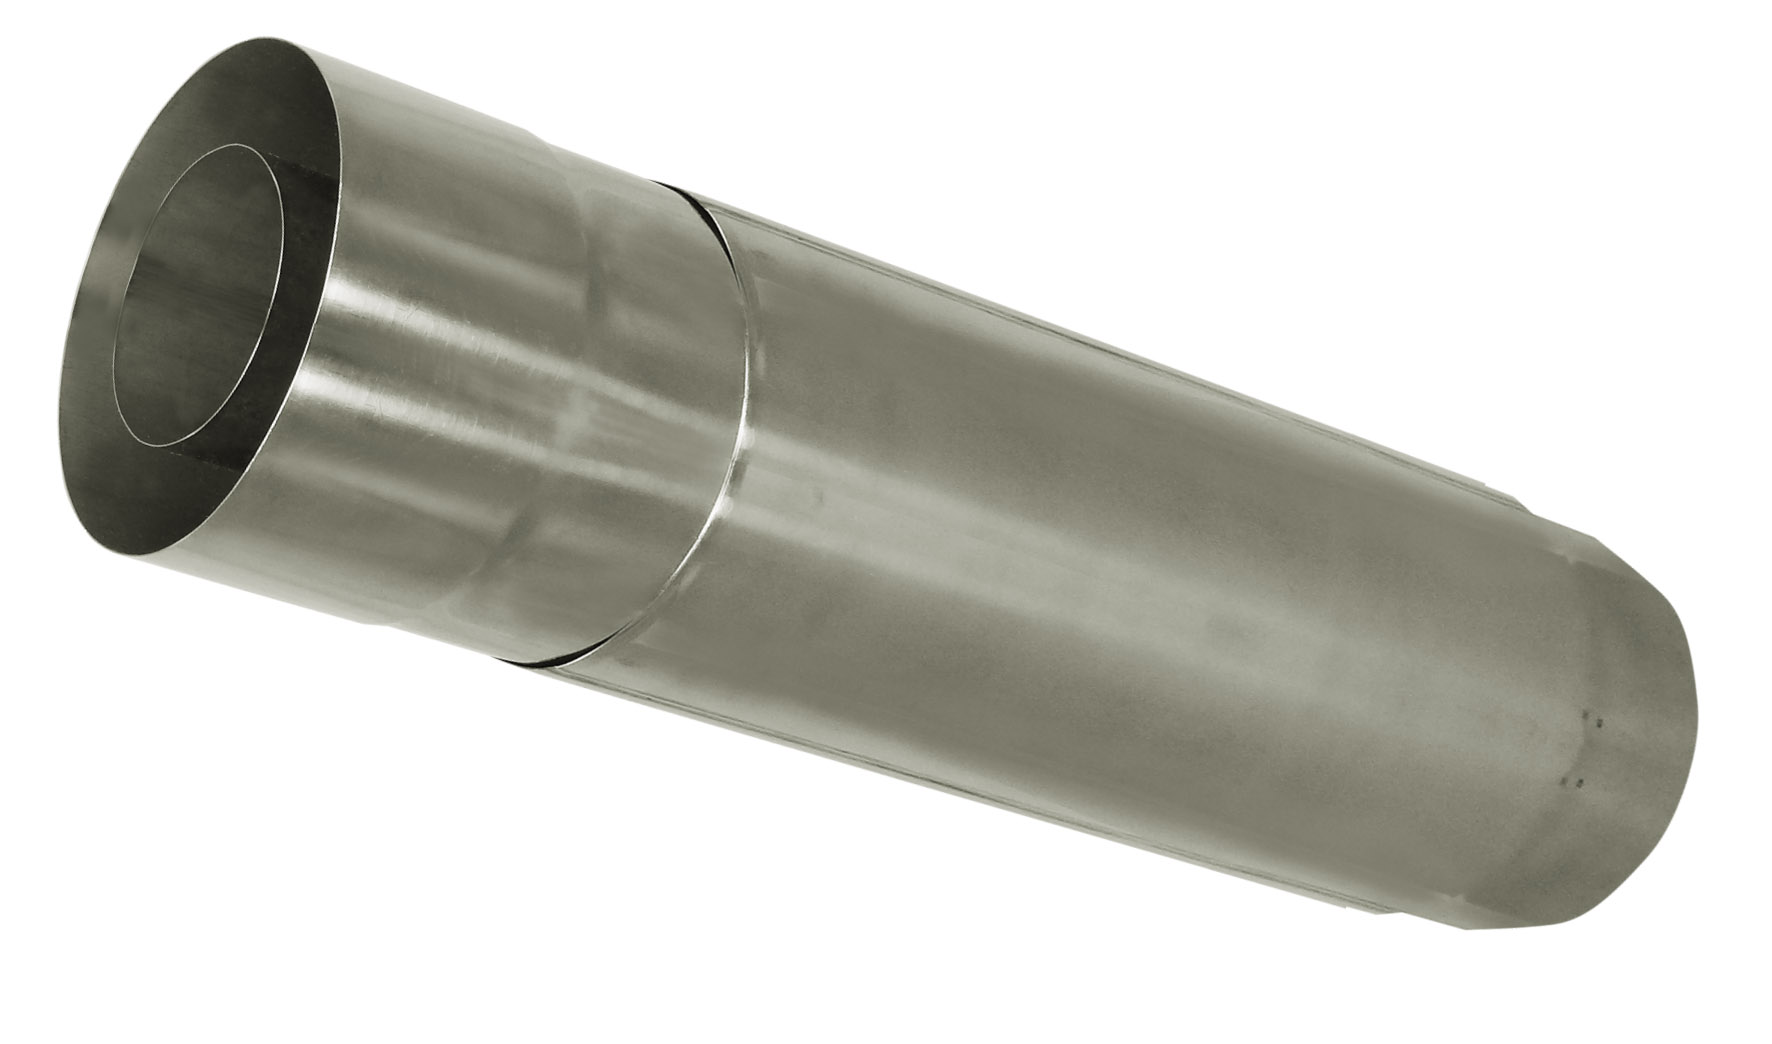 Double-balanced exhaust pipe / straight tube (containing size diameter)